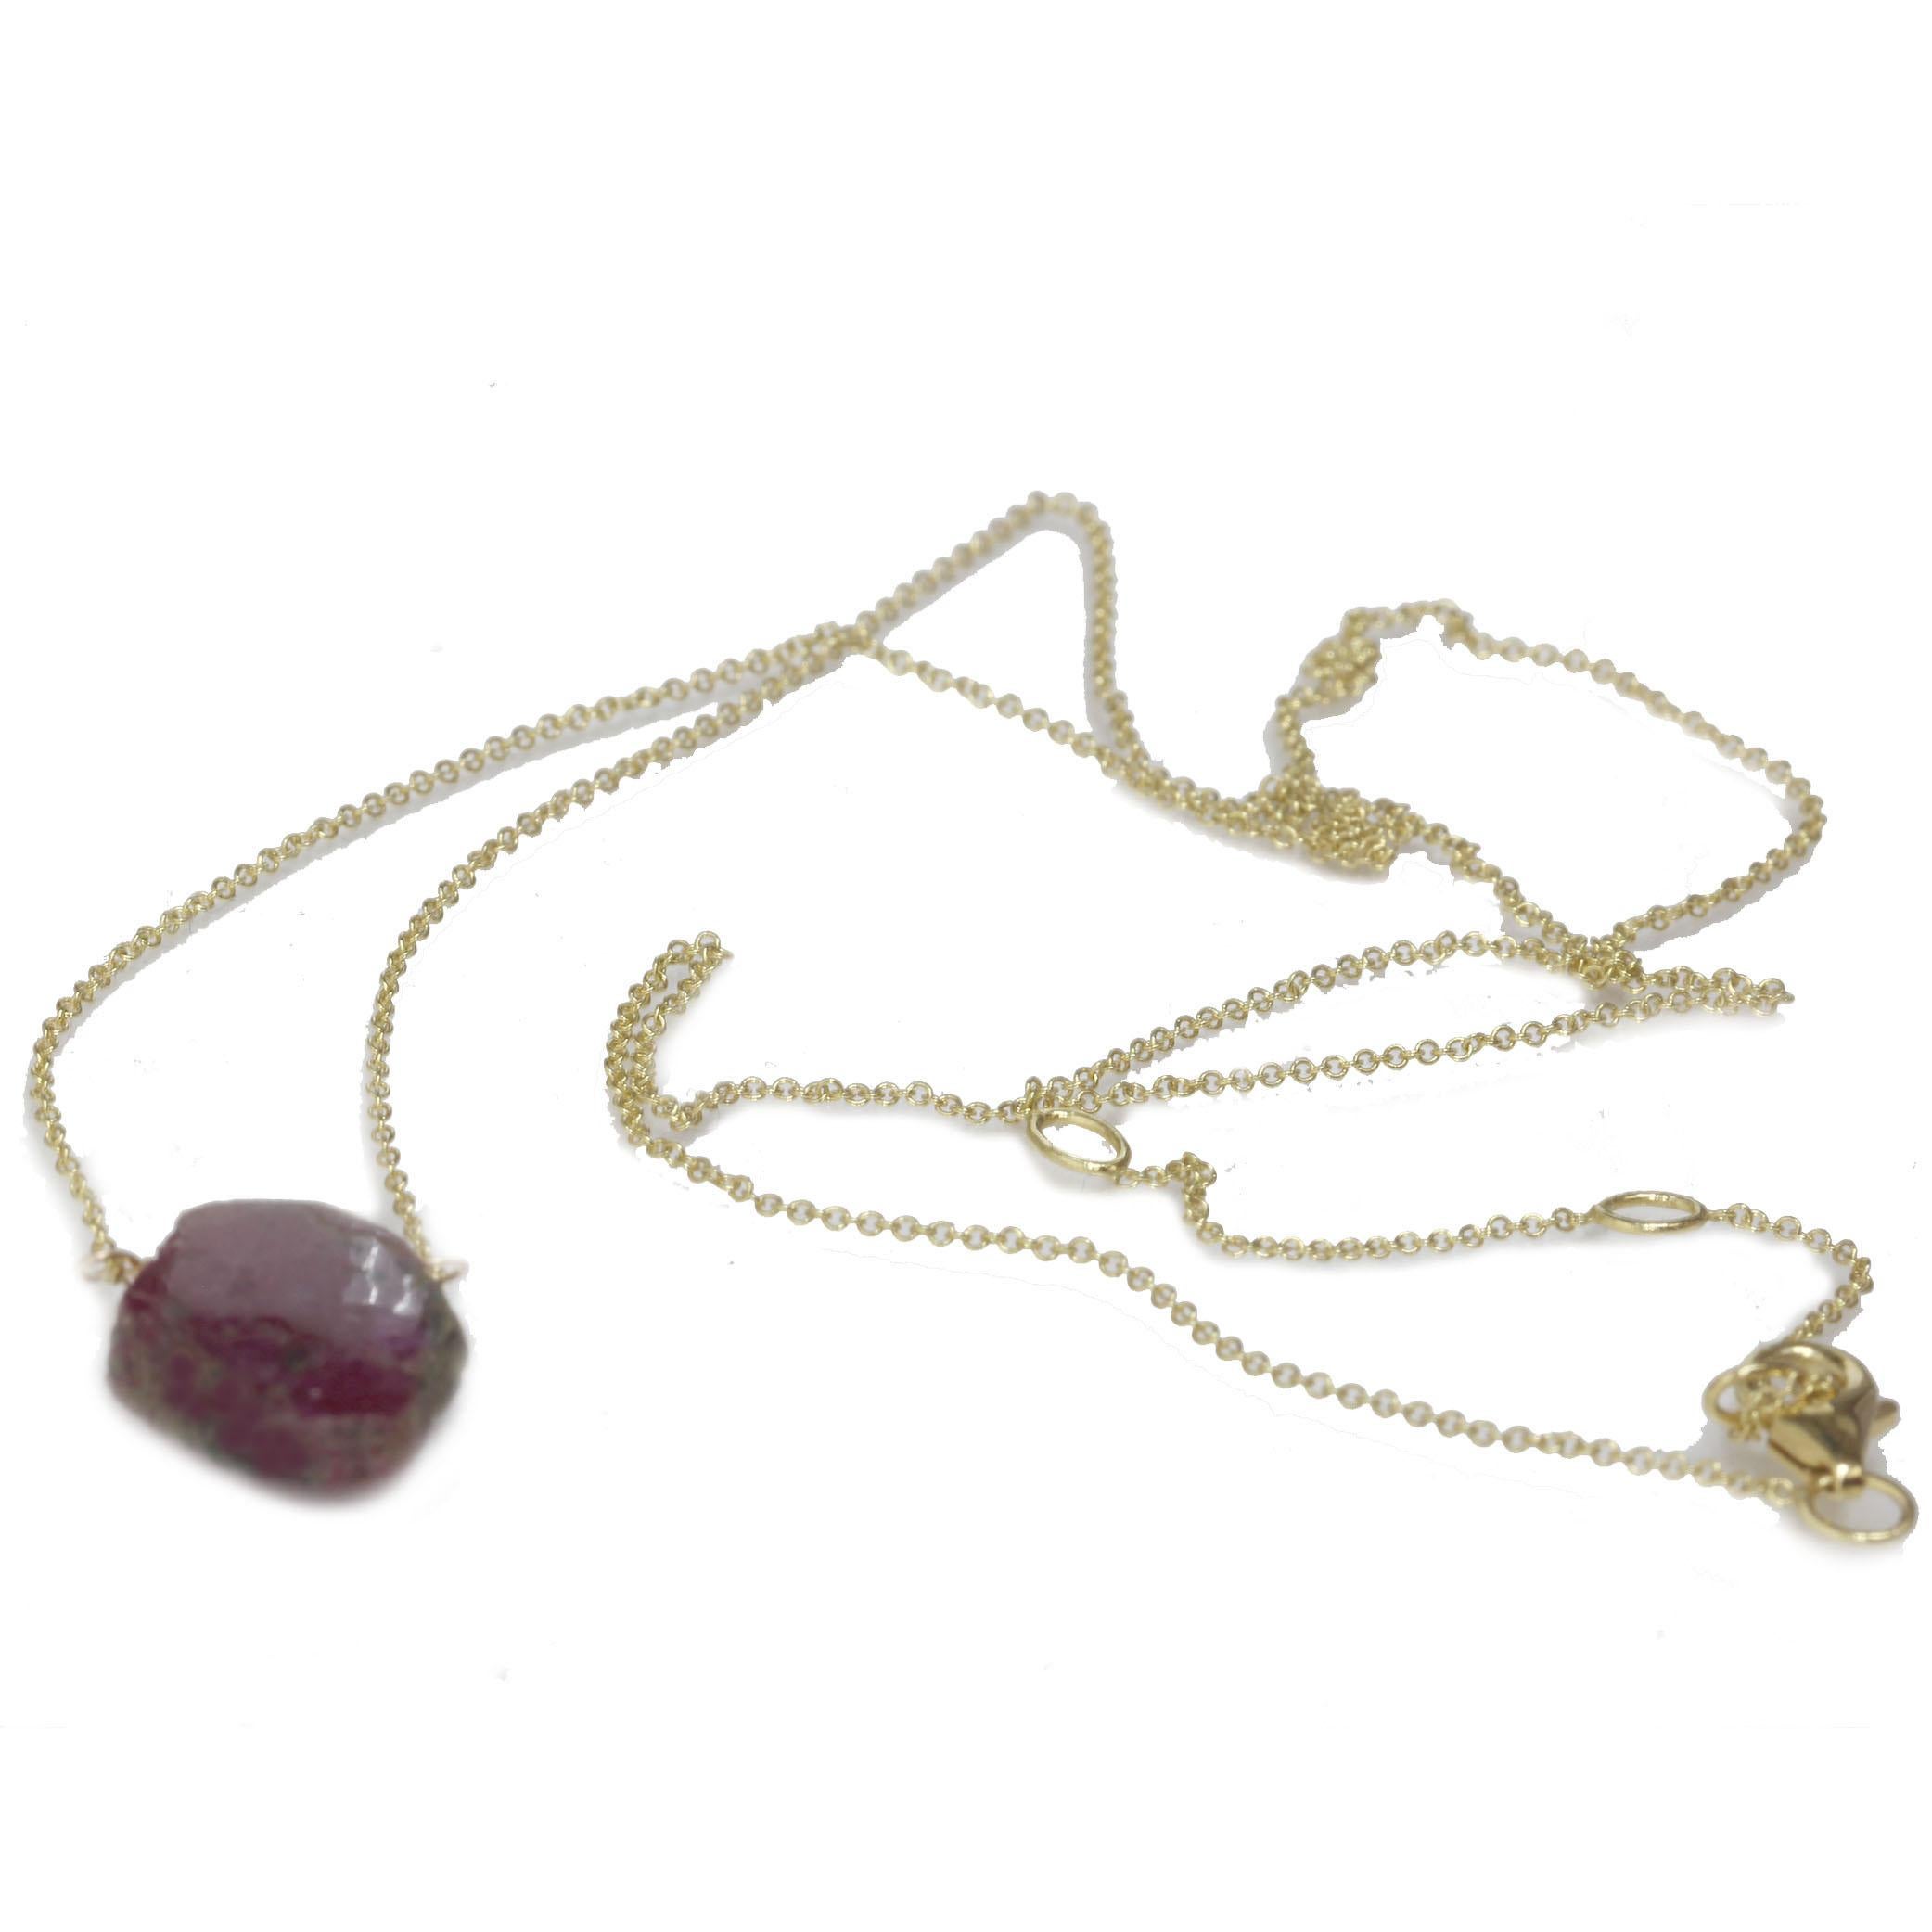 This ruby necklace is made of solid 14k yellow gold chain and hypoallergenic. This ruby necklace can be worn 16, 17 and 18 inches. Each ruby slice necklace is unique. Each ruby is selected carefully and every necklace is unique. Please note, as no